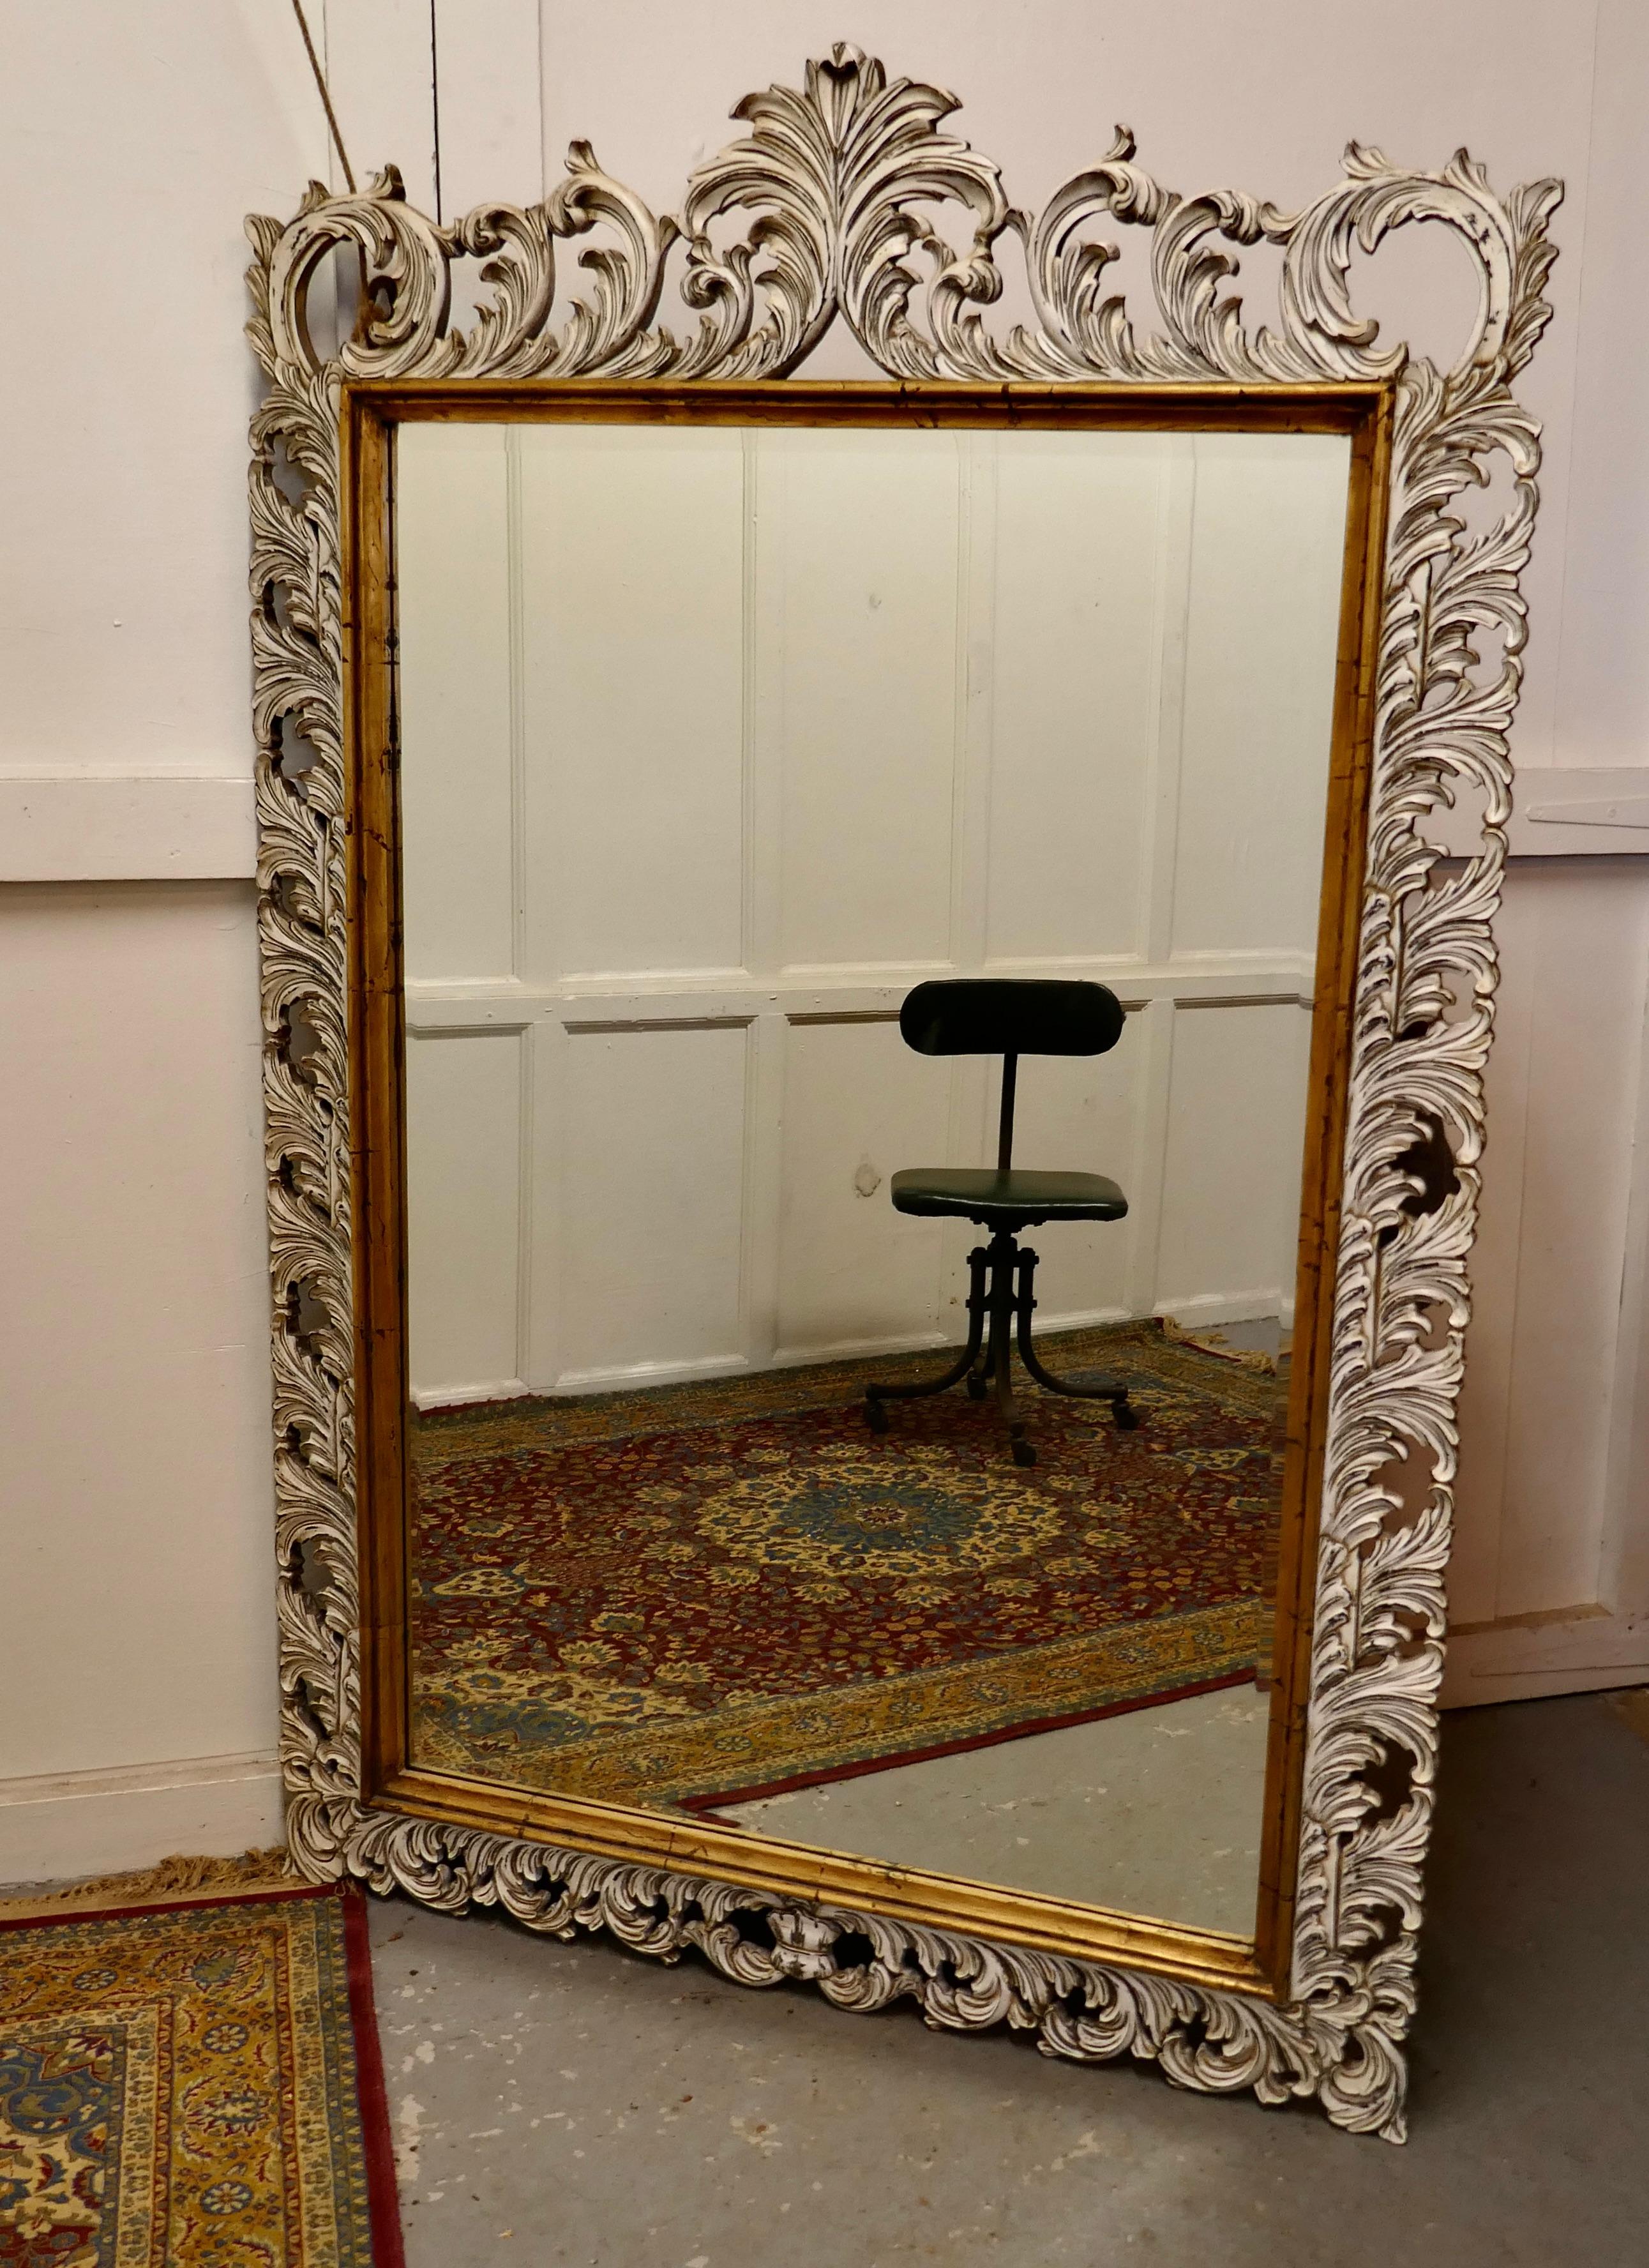 Large heavily carved fruitwood distressed paint mirror

A lovely piece the 6” wide frame is intricately carved with curving acanthus leaves 
The painted surface of the carved wood has been slightly distressed showing the great depth of the